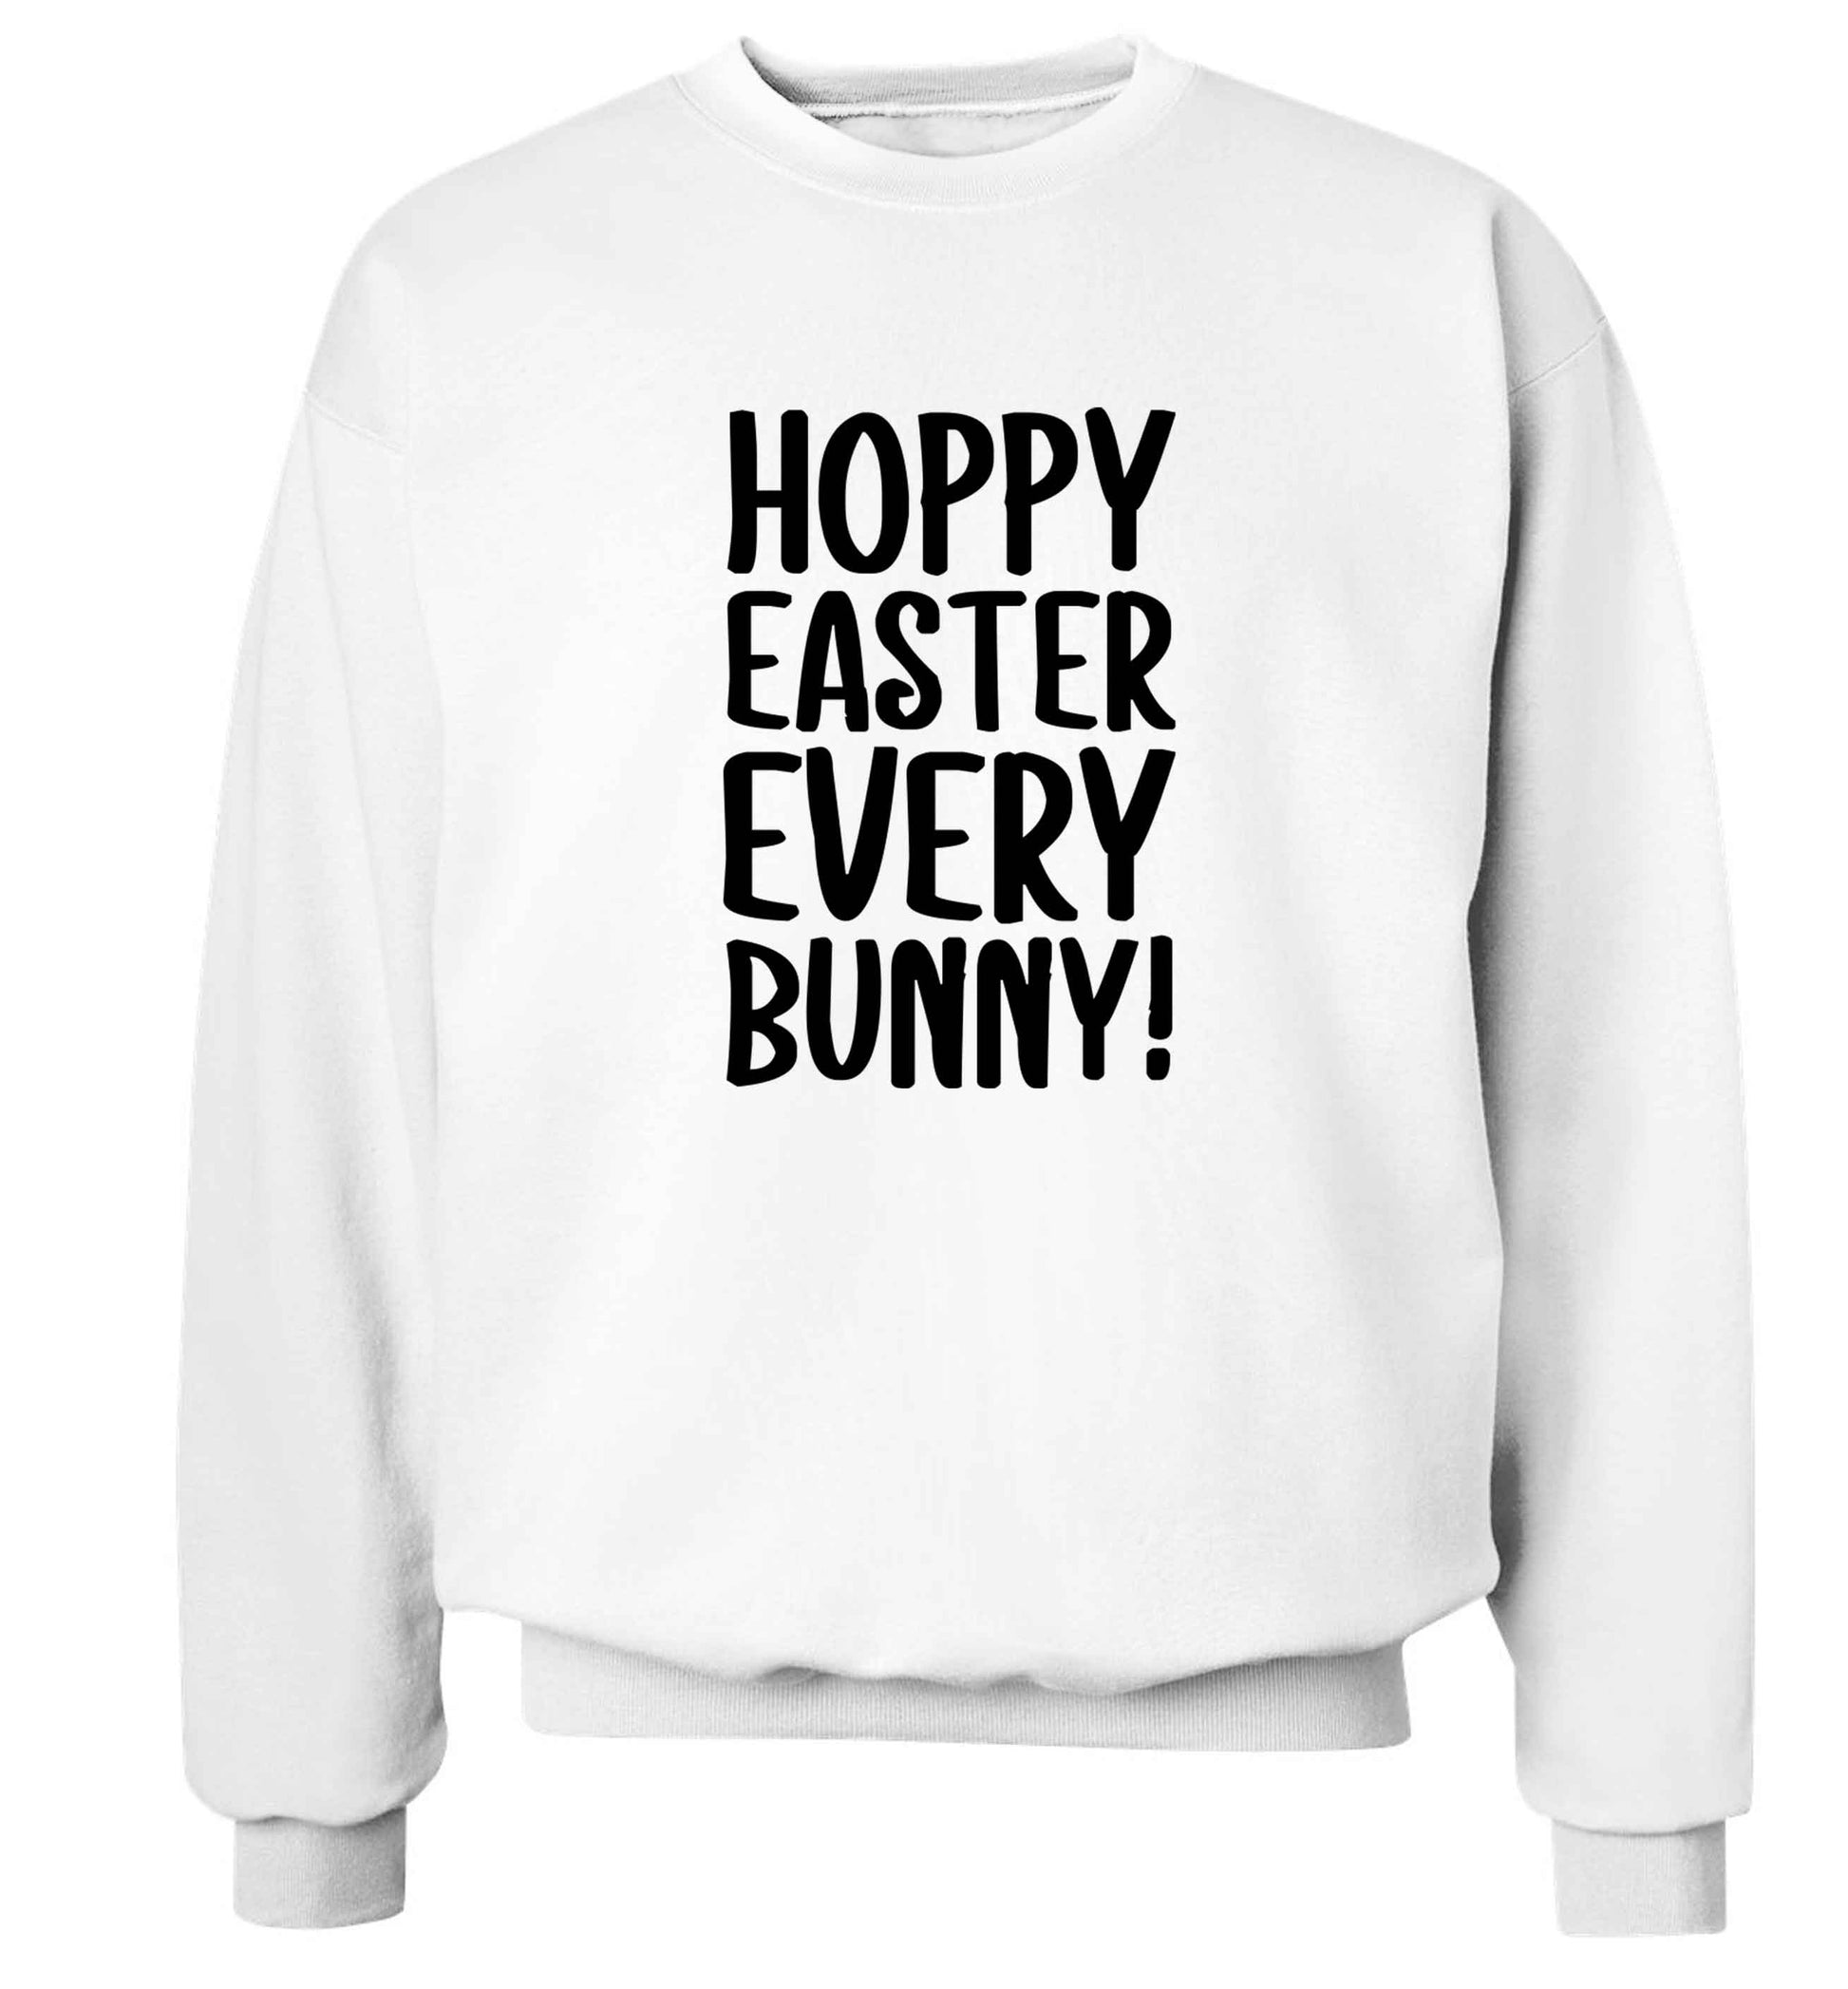 Hoppy Easter every bunny! adult's unisex white sweater 2XL